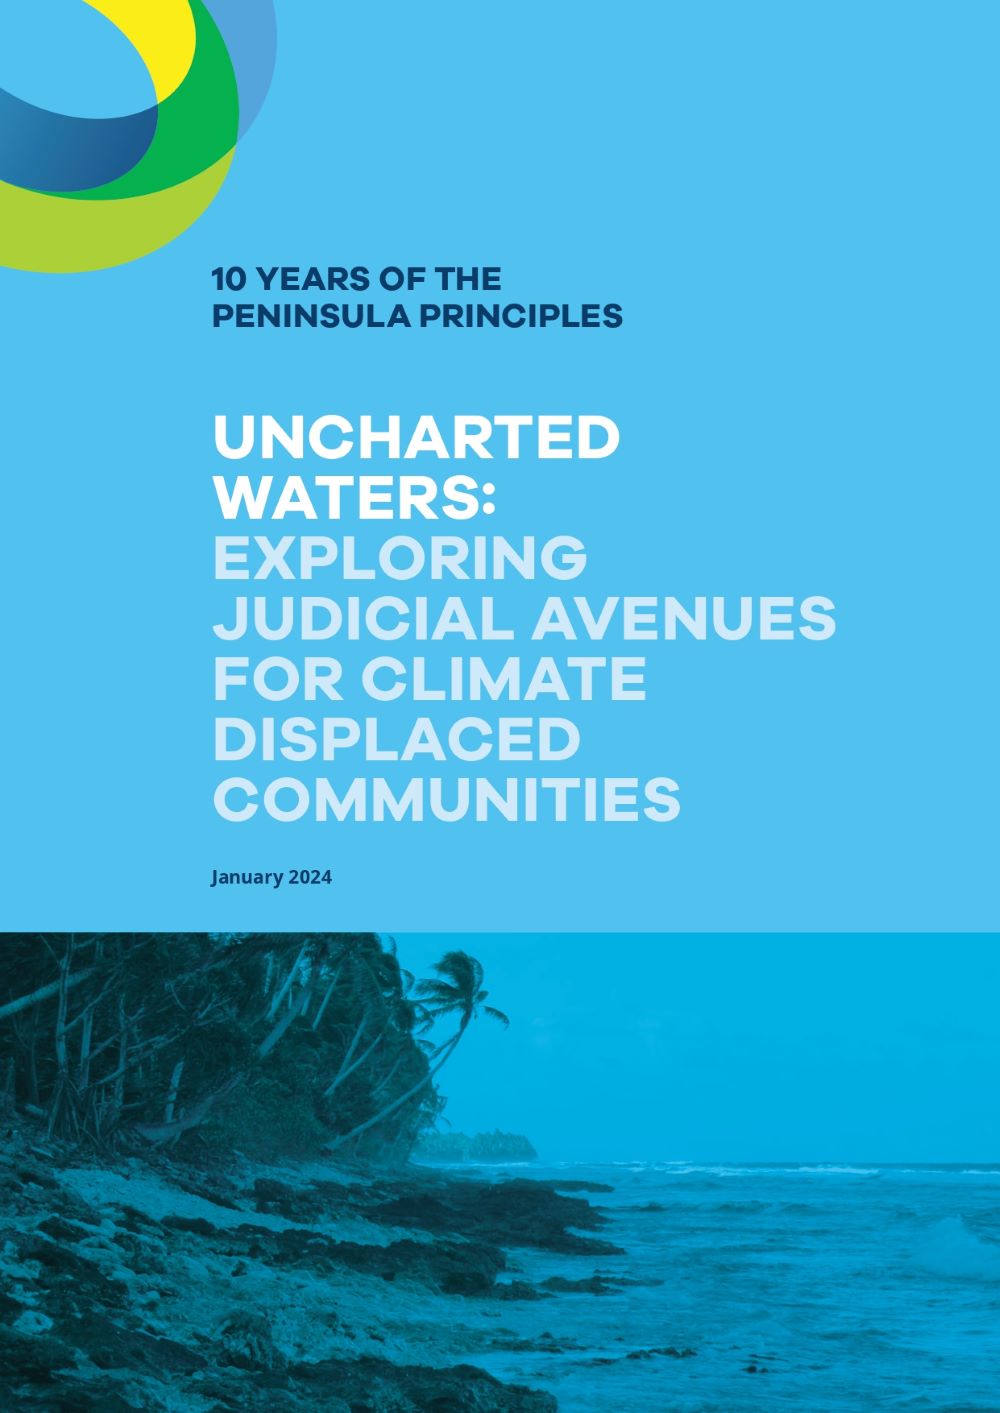 Uncharted Waters: Exploring Judicial Avenues for Climate Displaced Communities